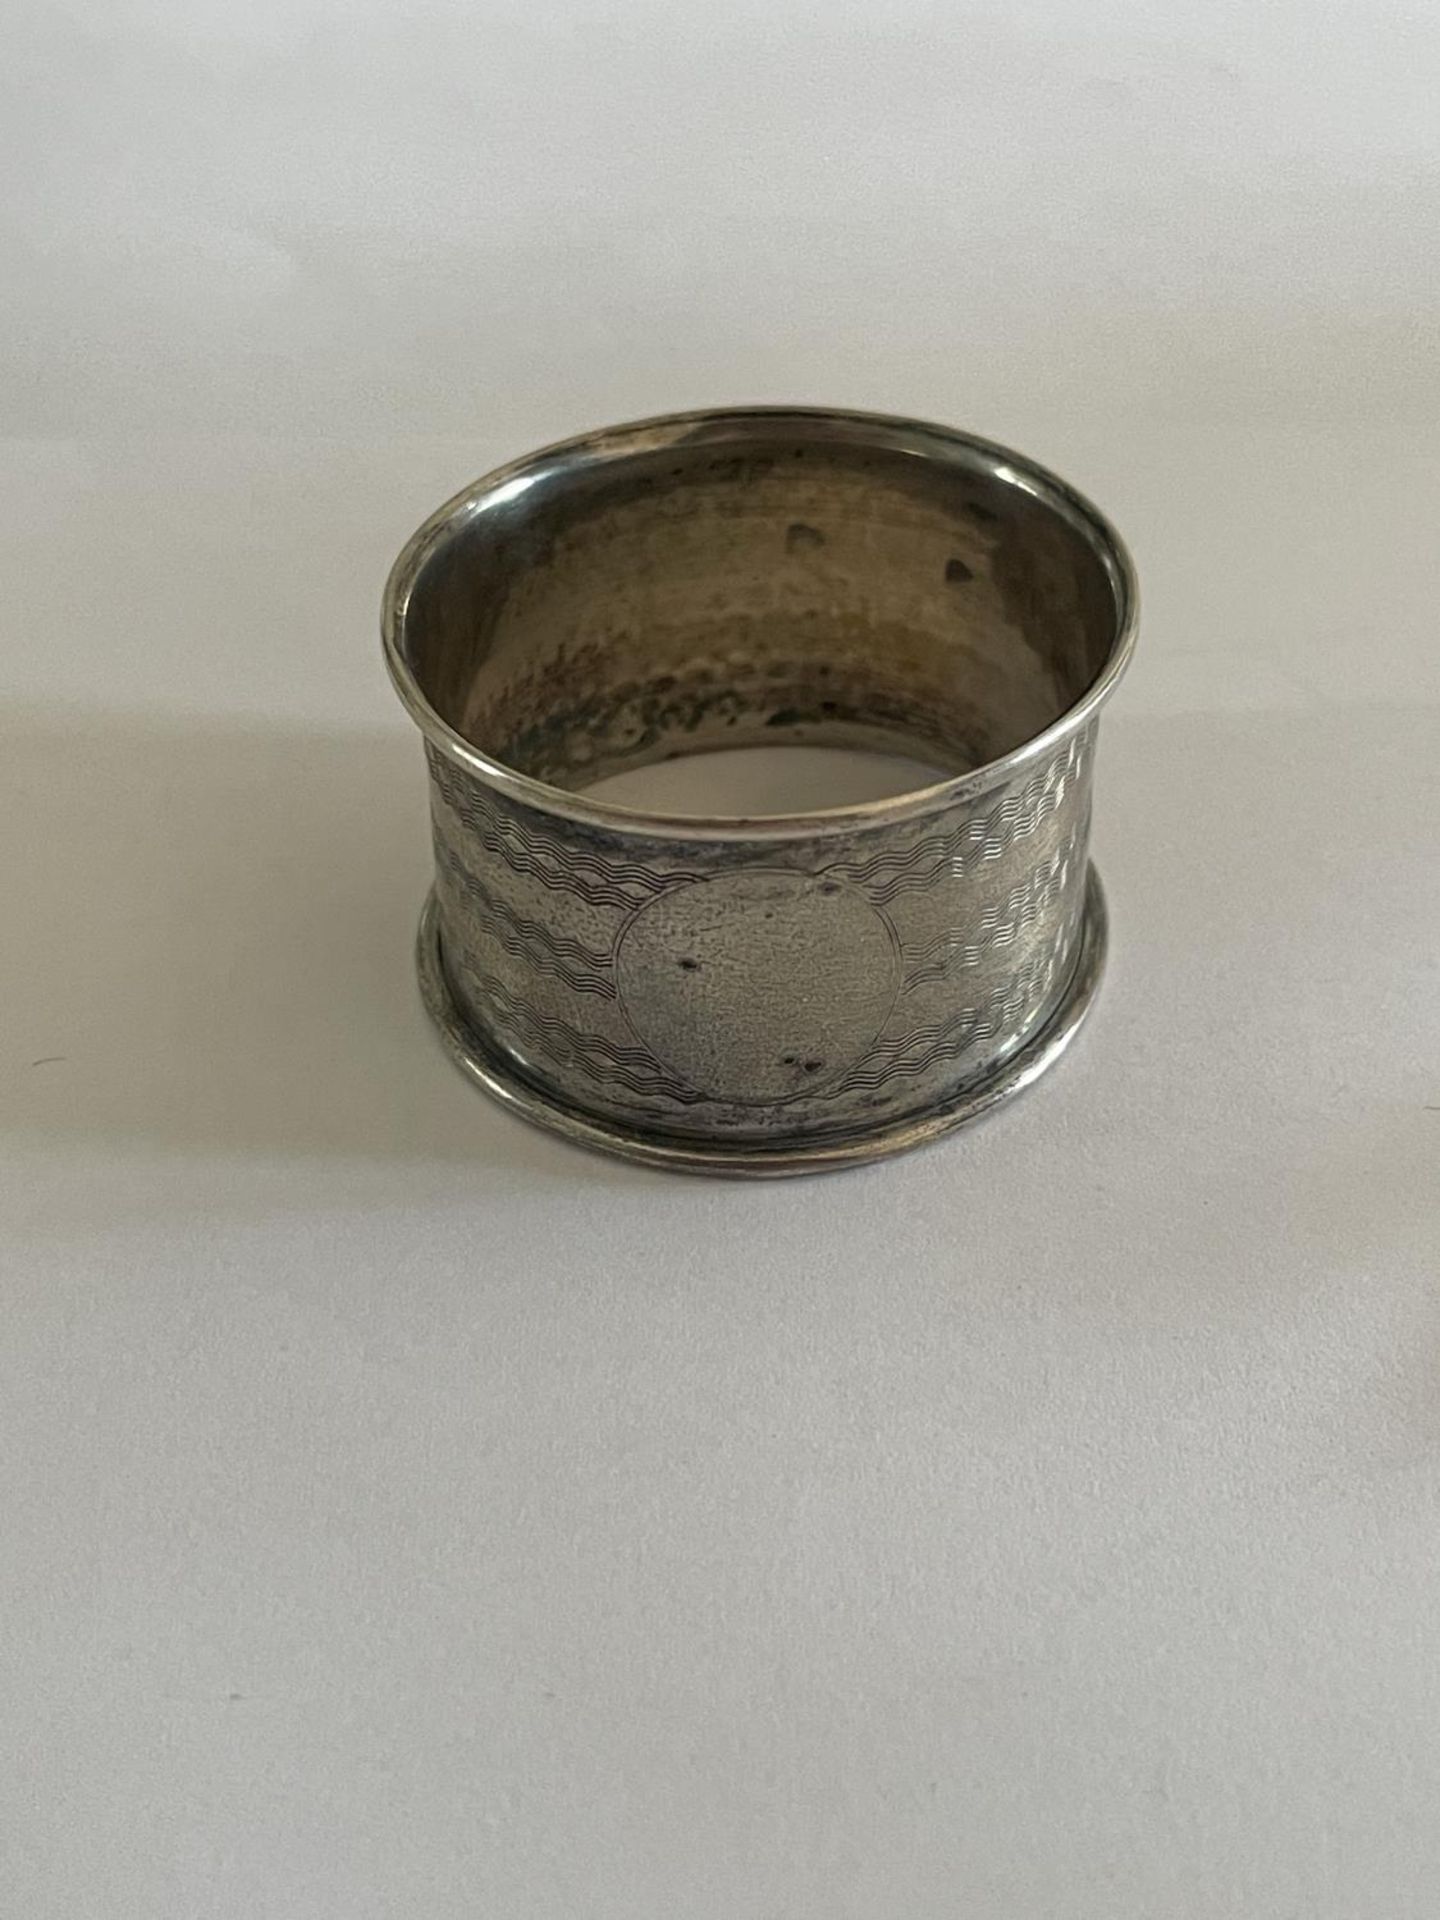 A HALLMARKED BIRMINGHAM SILVER NAPKIN RING AND A MARKED STERLING SPOON - Image 4 of 4